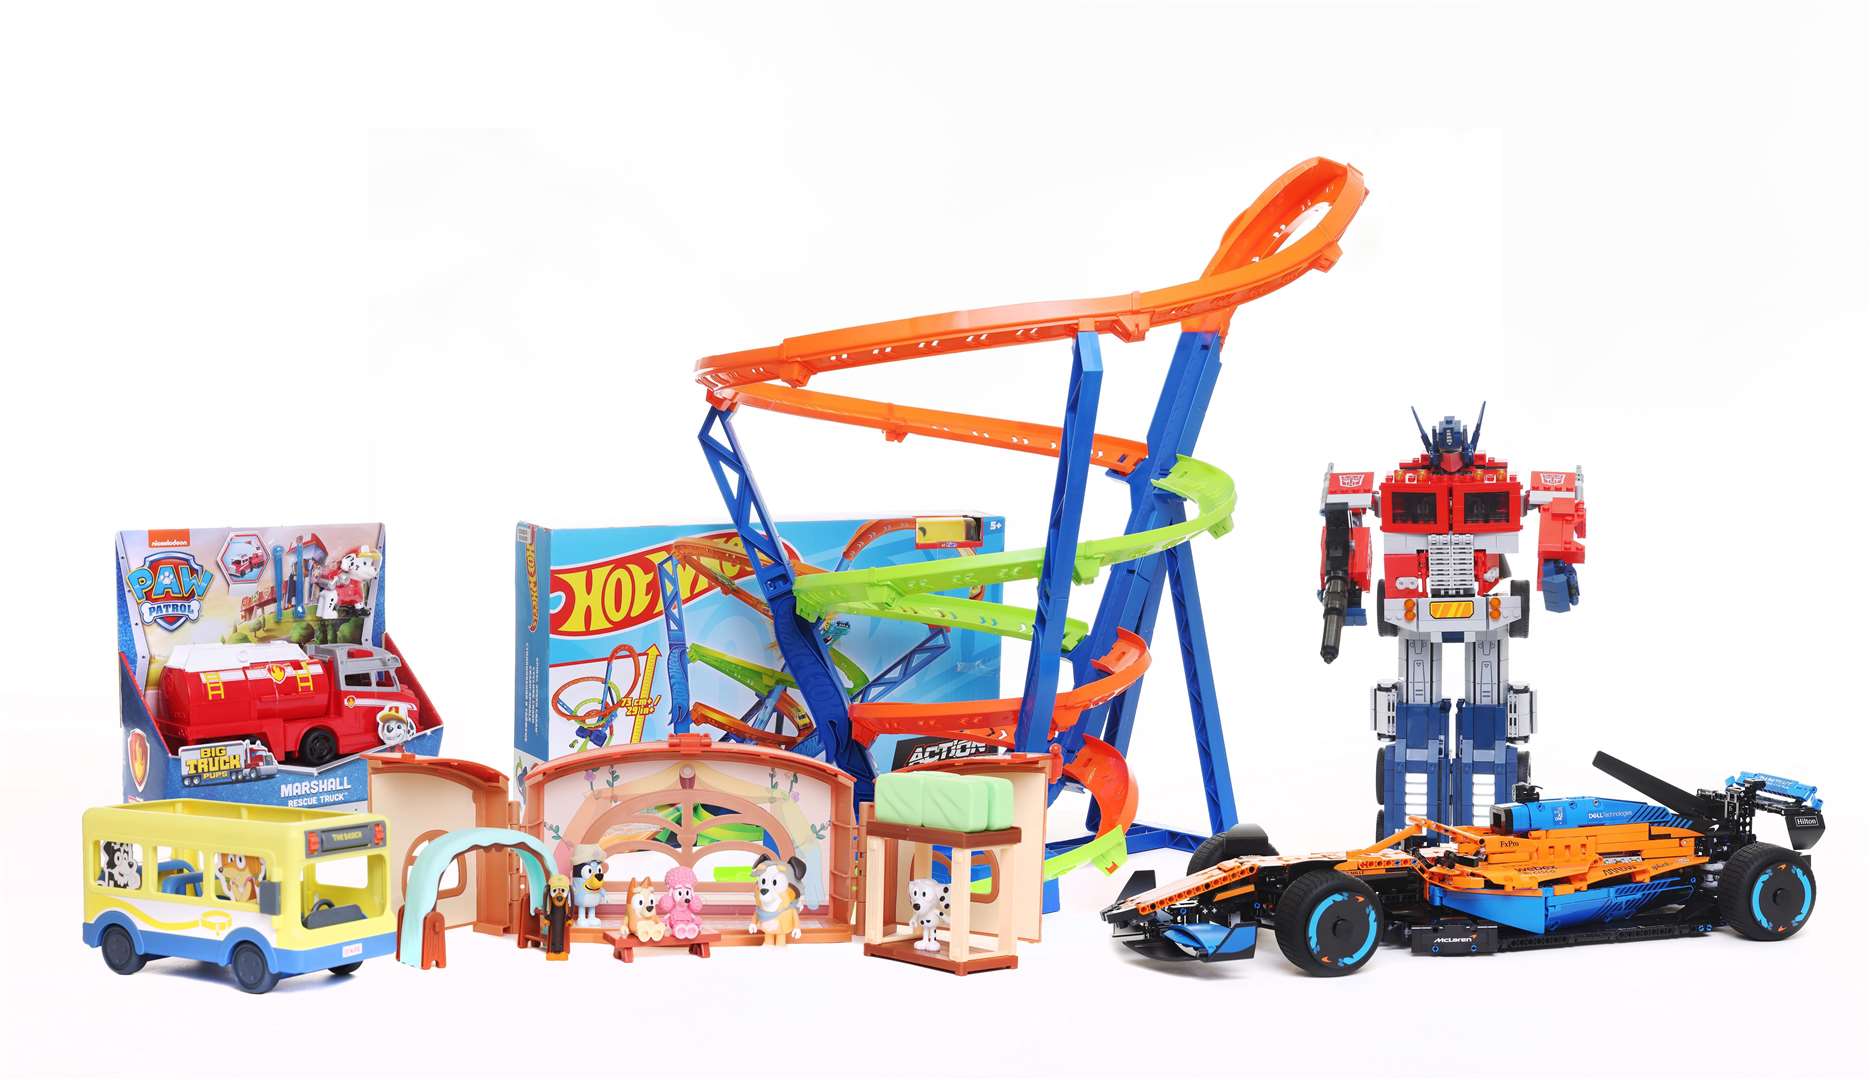 Argos releases its top 15 toys for Christmas 2022 with releases from Lego,  Barbie, Paw Patrol and Bluey all in the mix